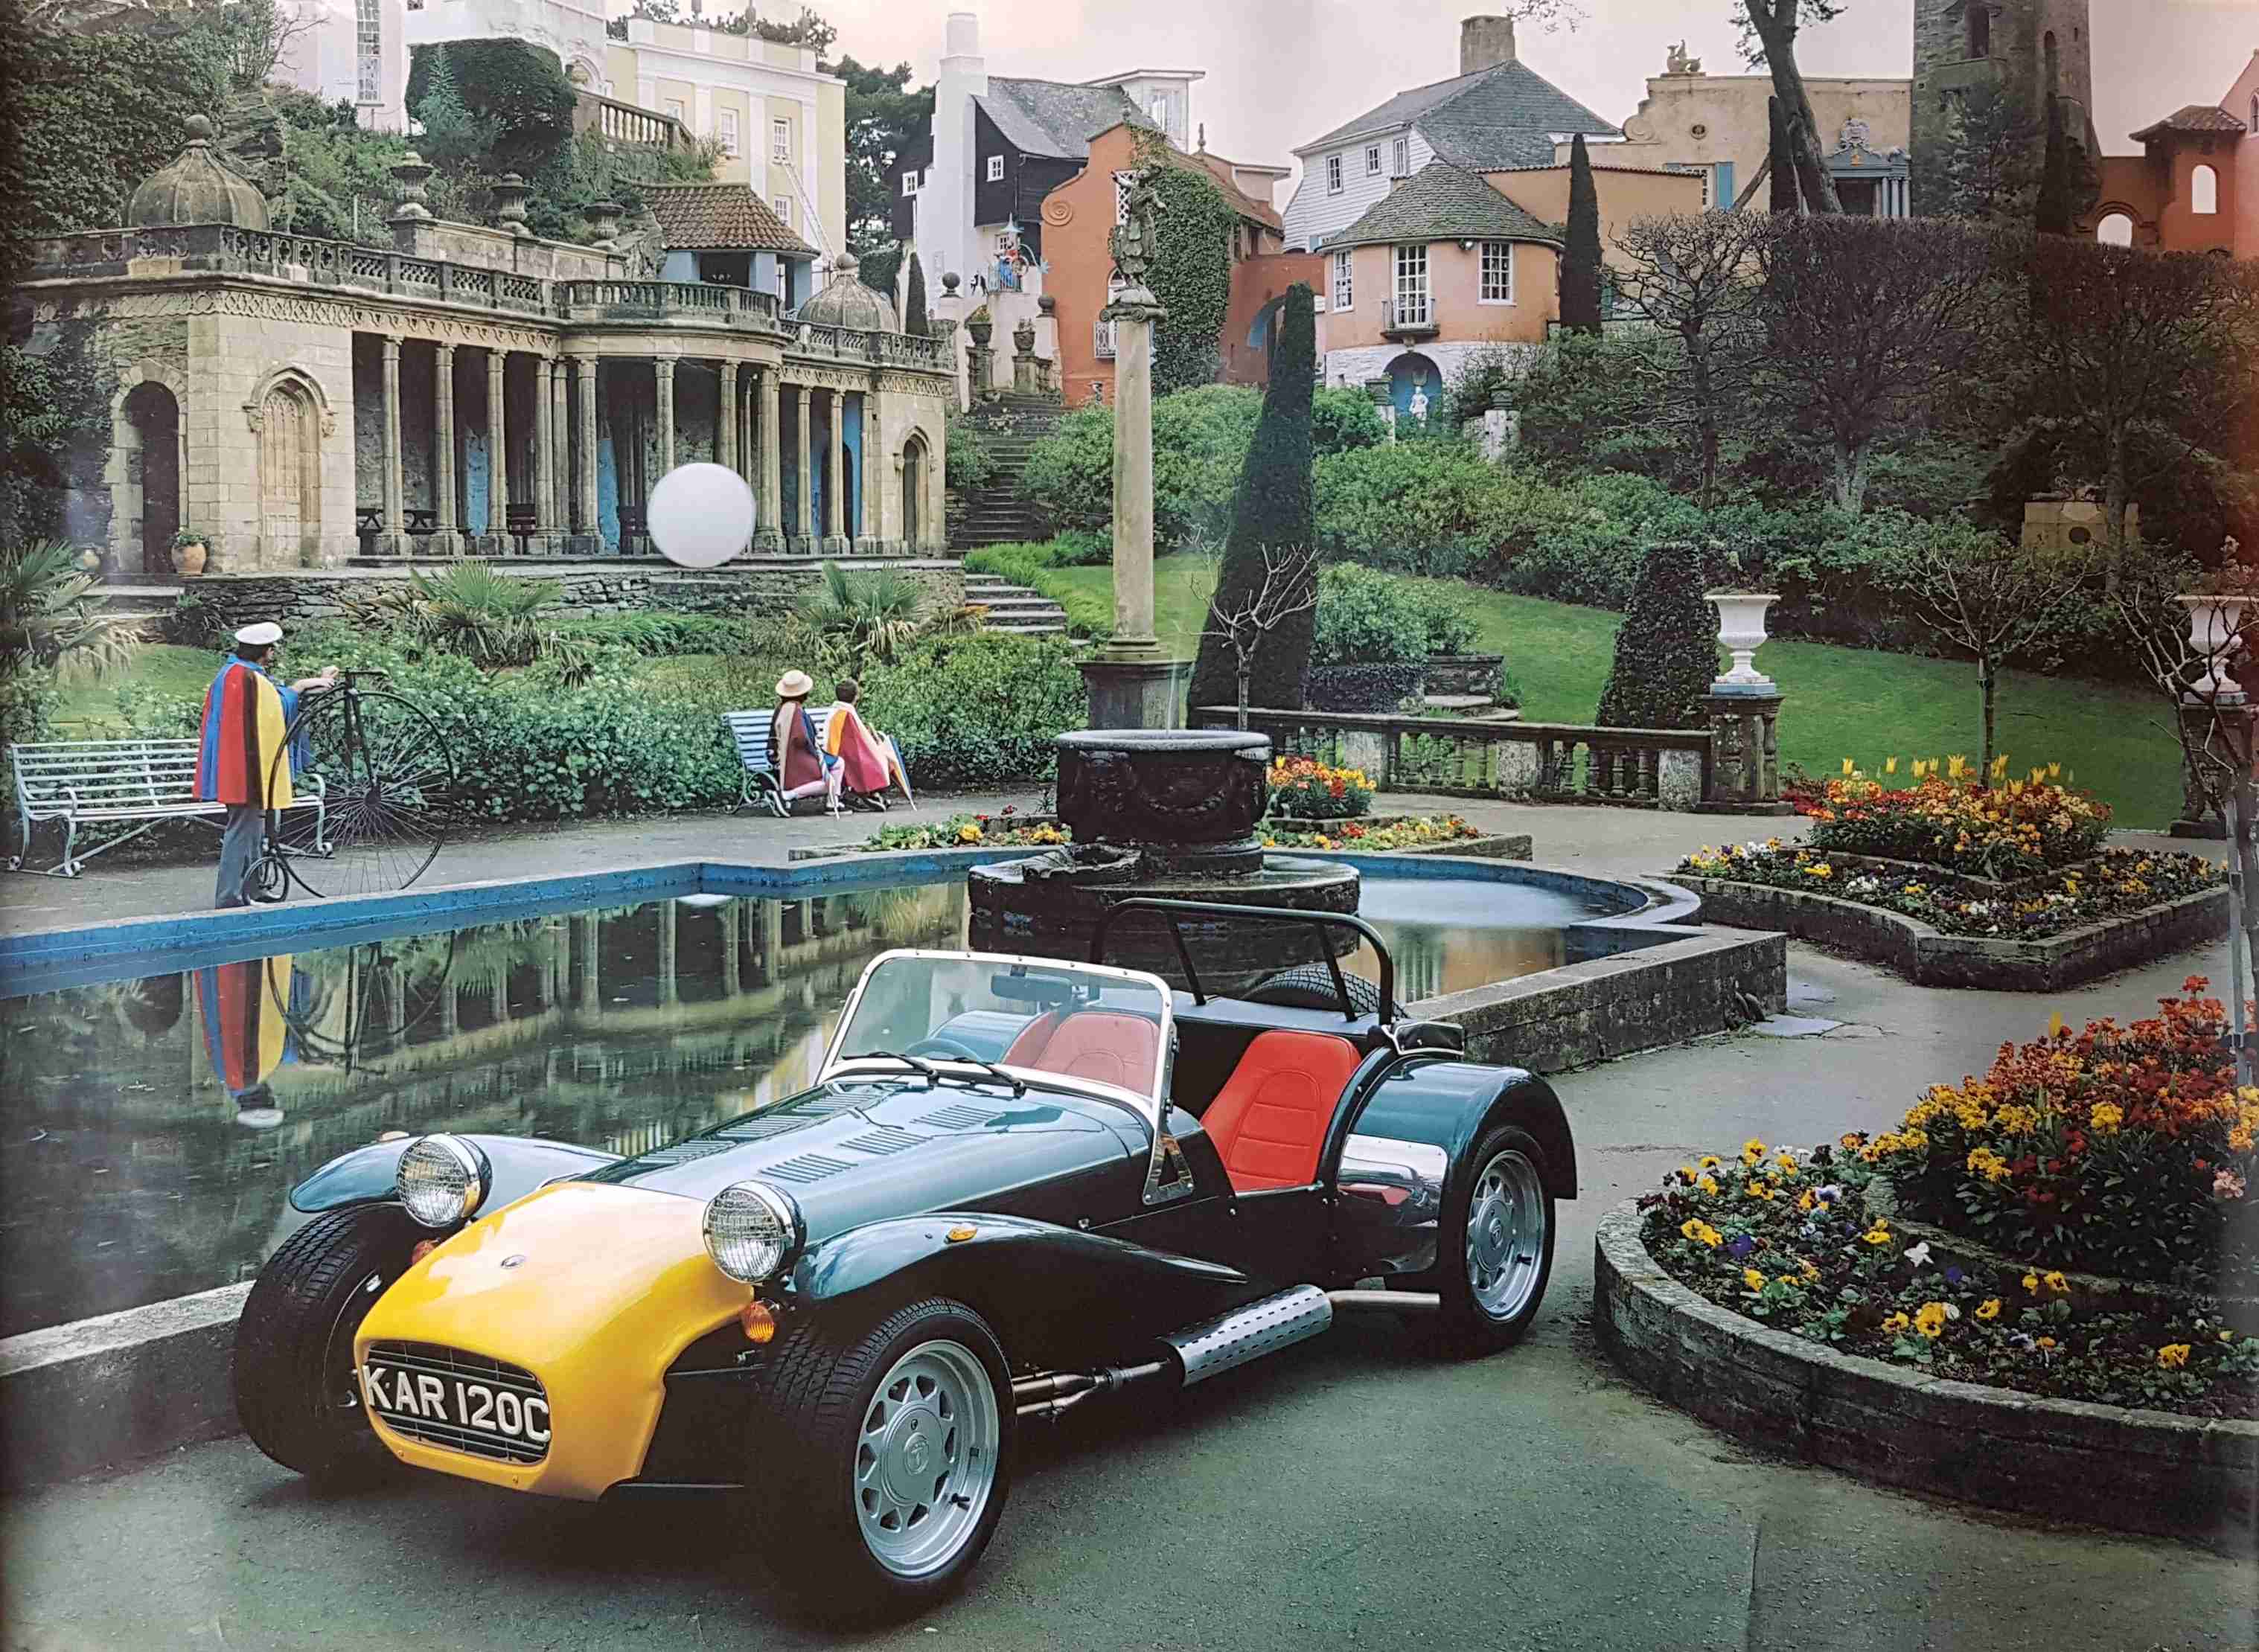 Picture of The prisoner - KAR 120C in front of the Village pond and Rover by artist Unknown from ITV, Channel 4 and Channel 5 posters library